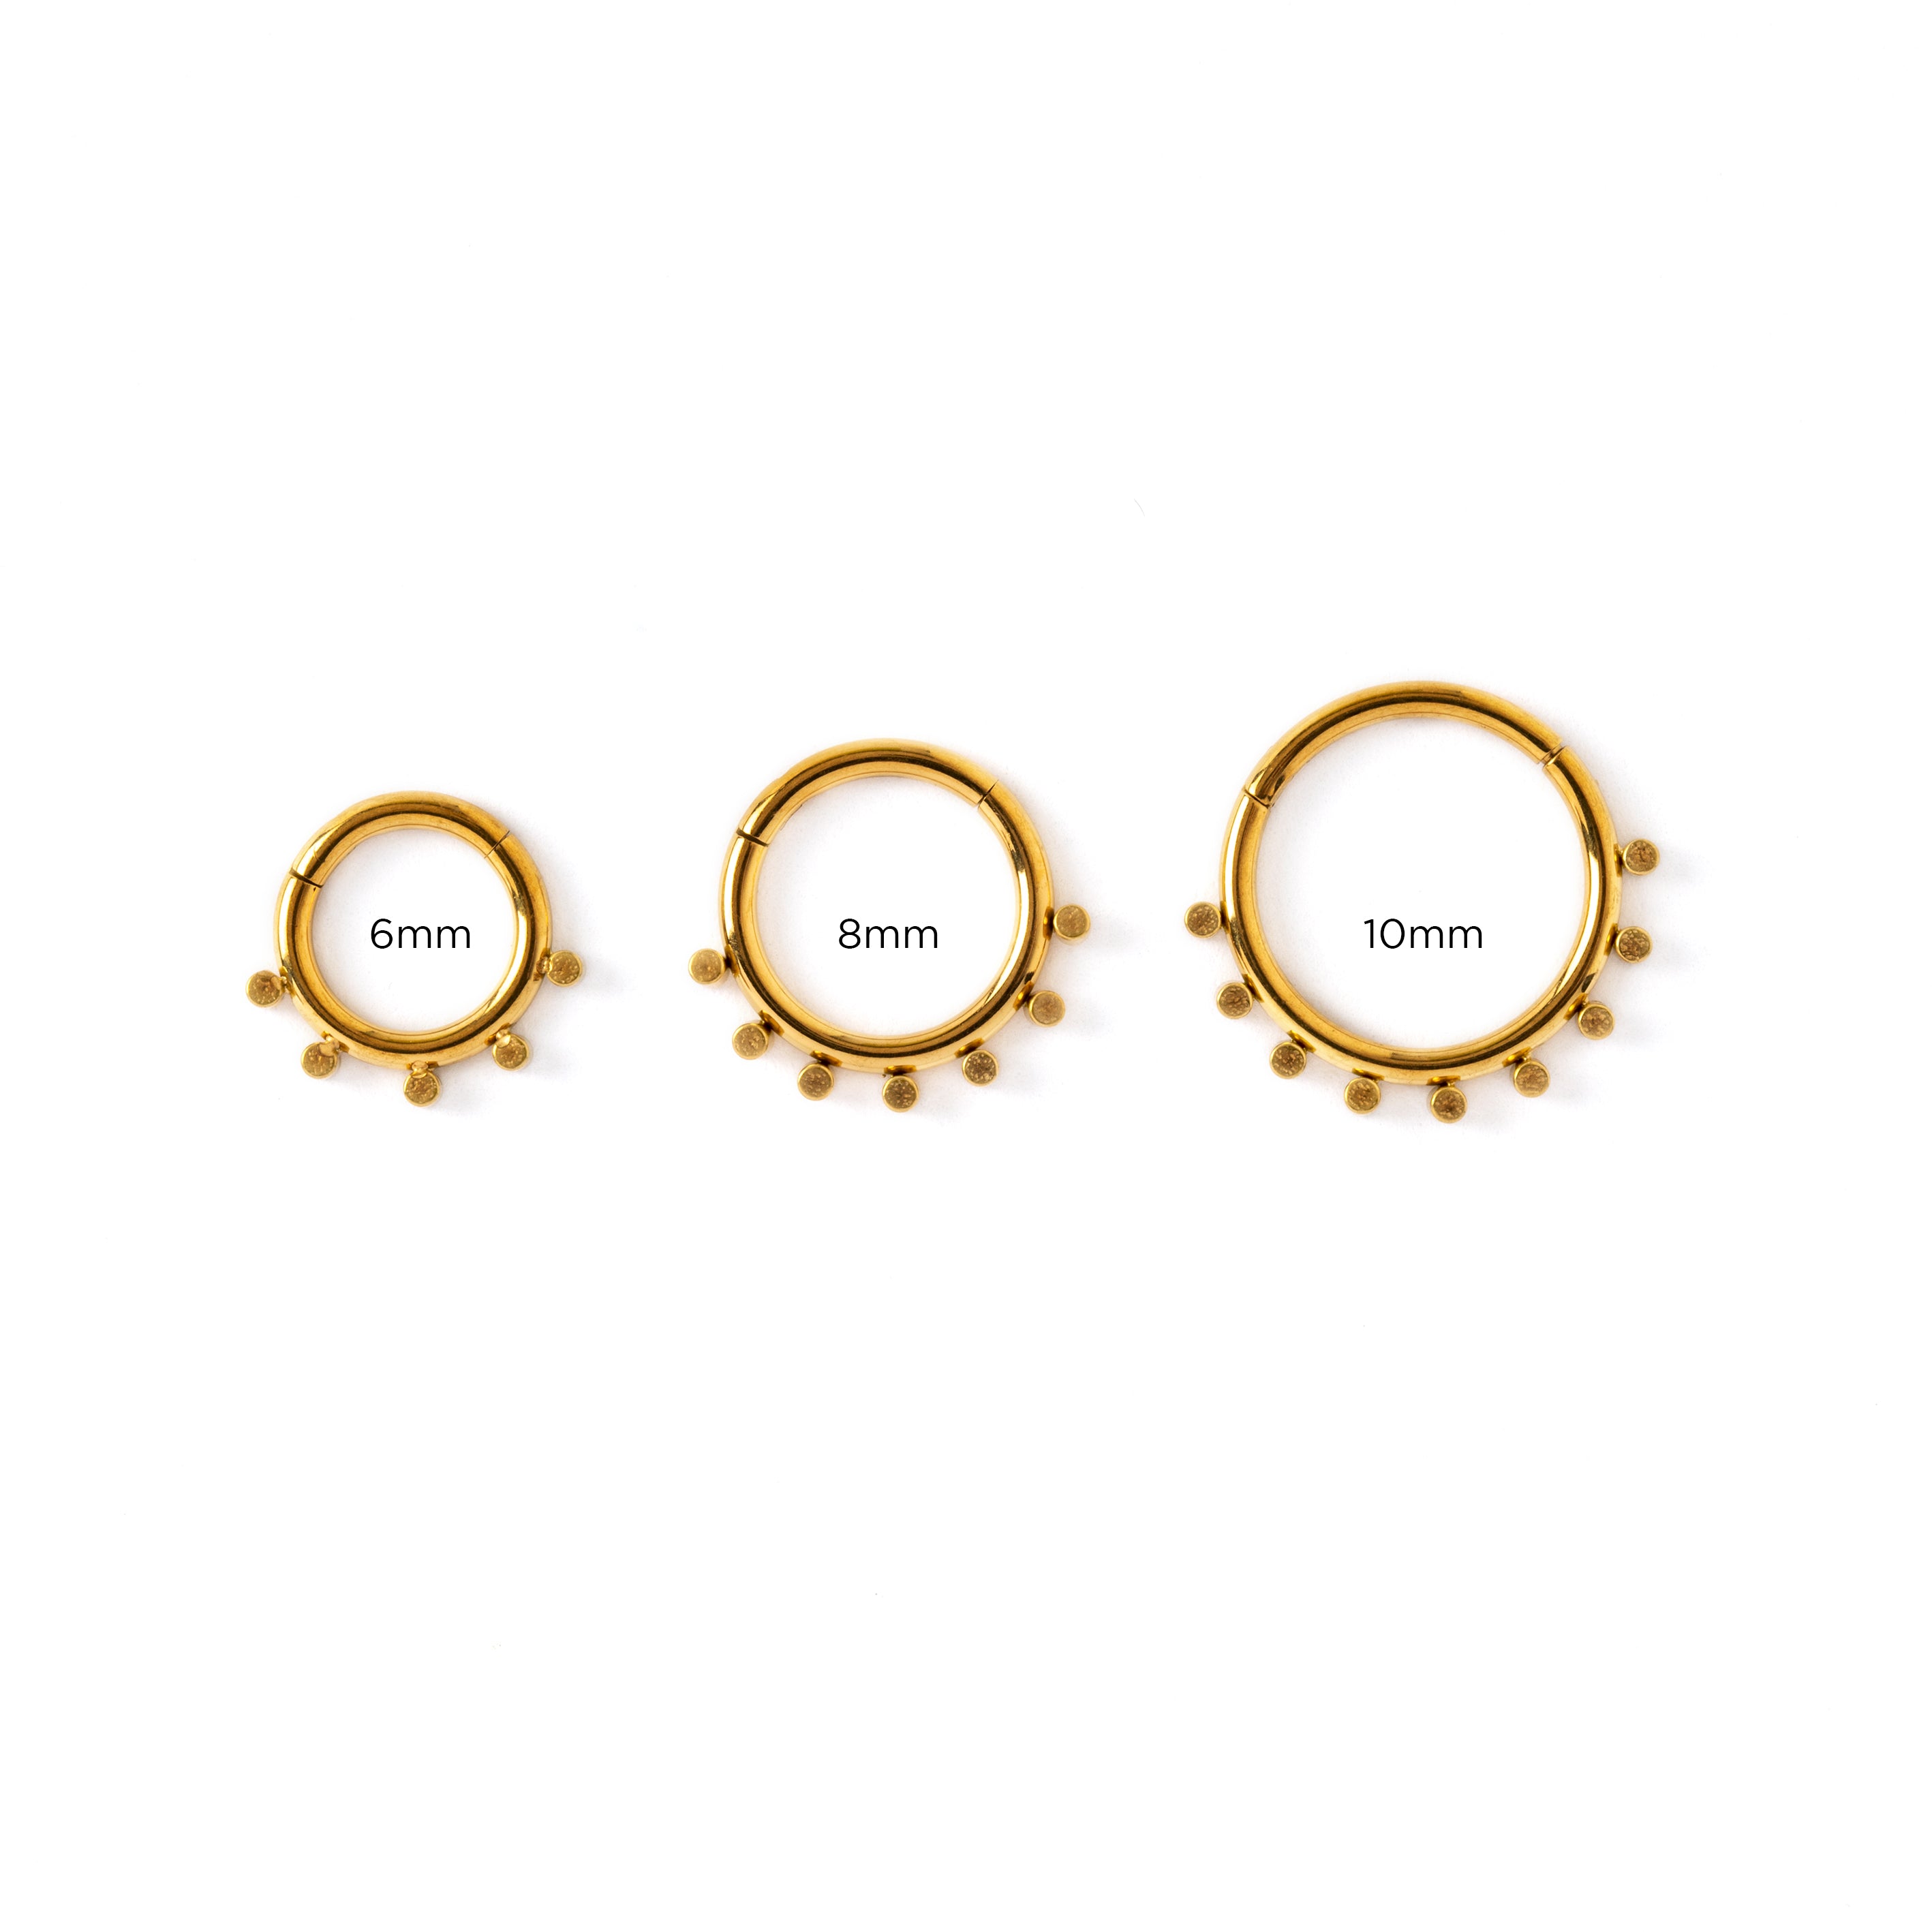 6mm, 8mm,10mm Alya golden surgical steel septum clickers frontal view